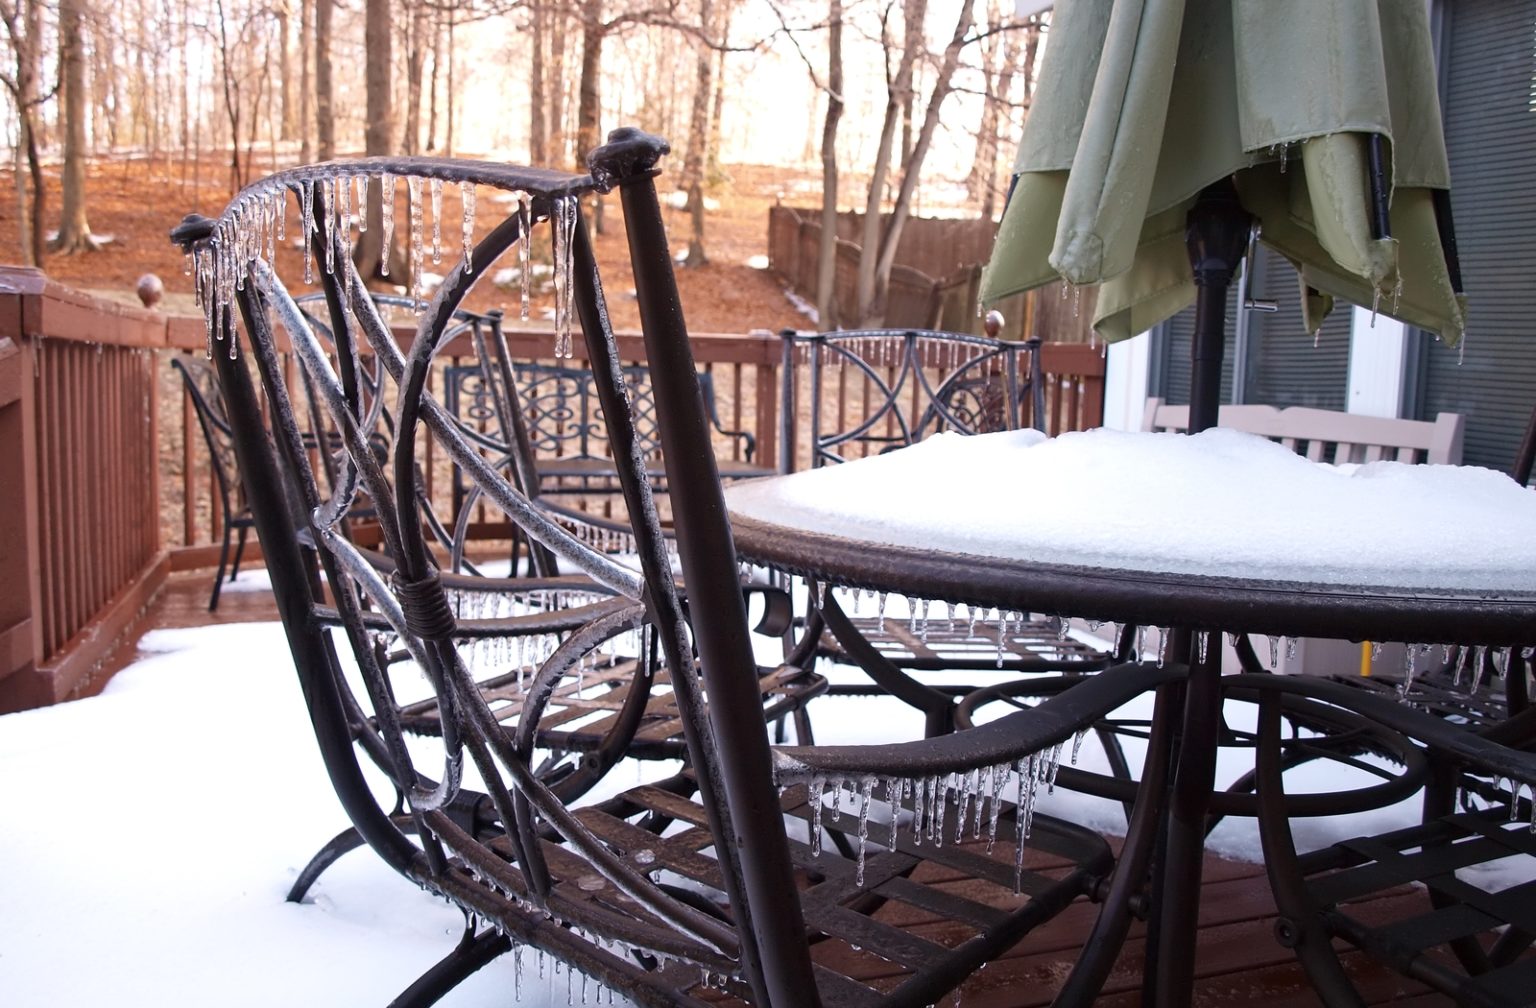 Patio furniture left outside during the winter months